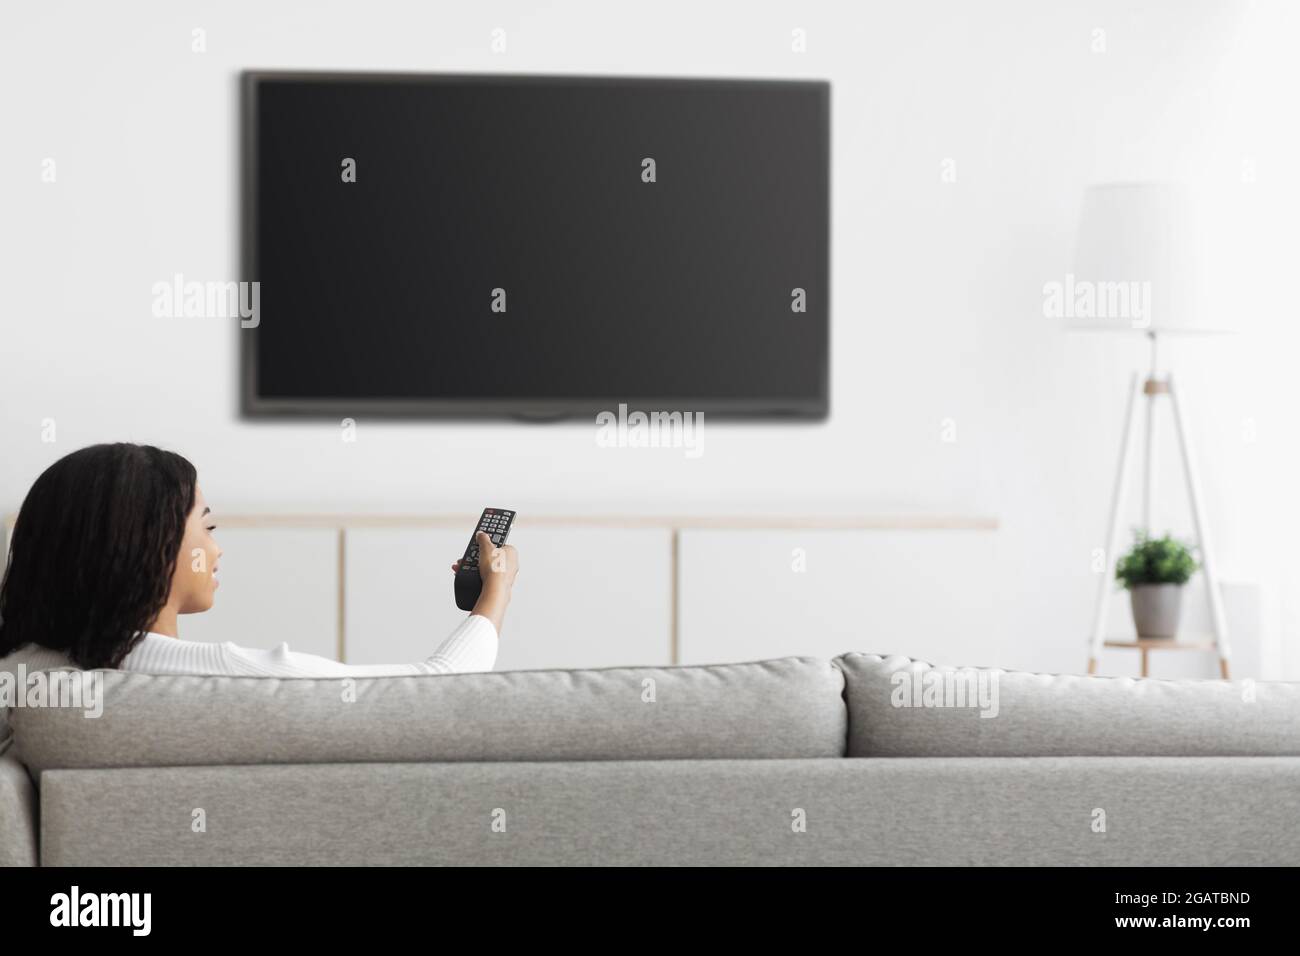 African american woman watching TV pointing remote control at flatscreen plasma television set with blank screen, switching channels while sitting on Stock Photo